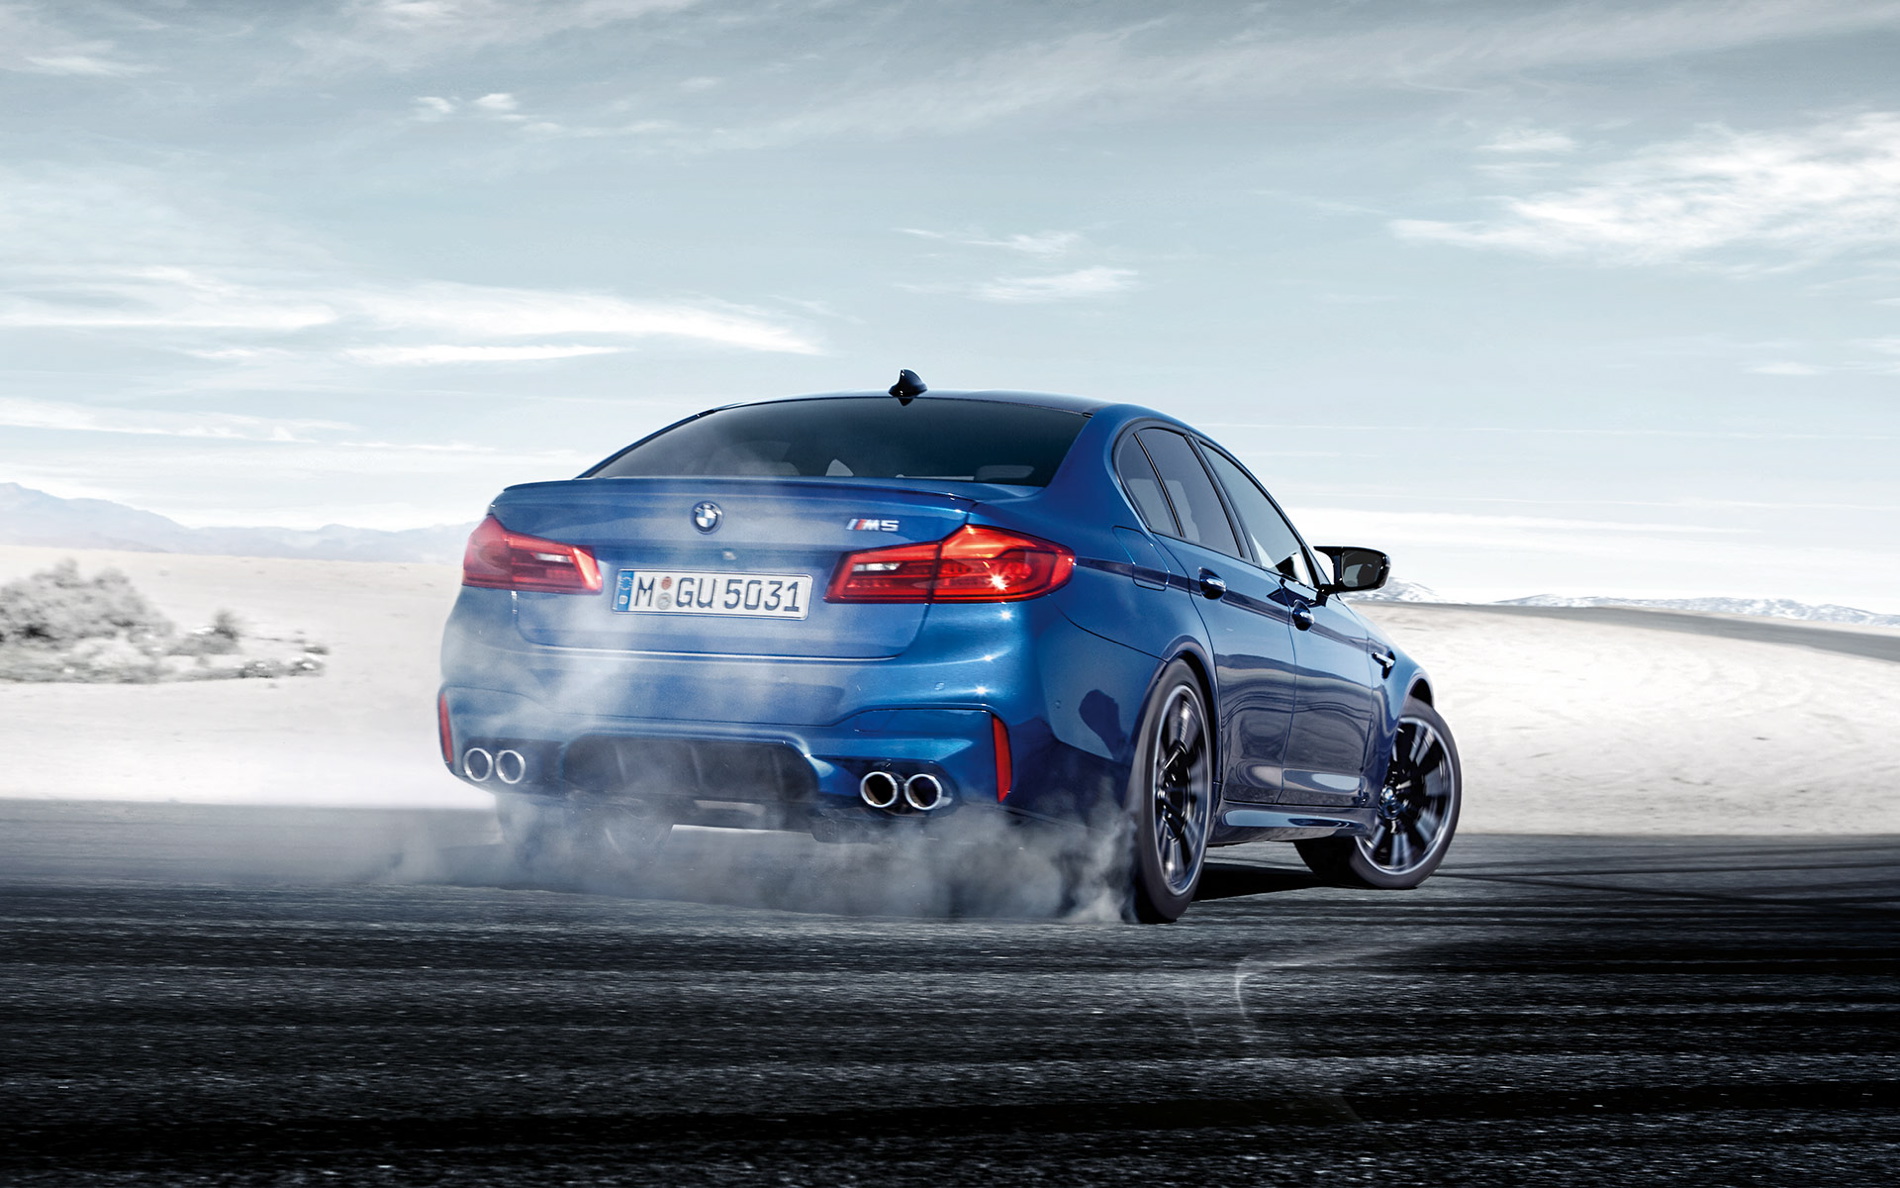 Frank Van Meel Ceo Of Bmw M Introduces The New M5 At